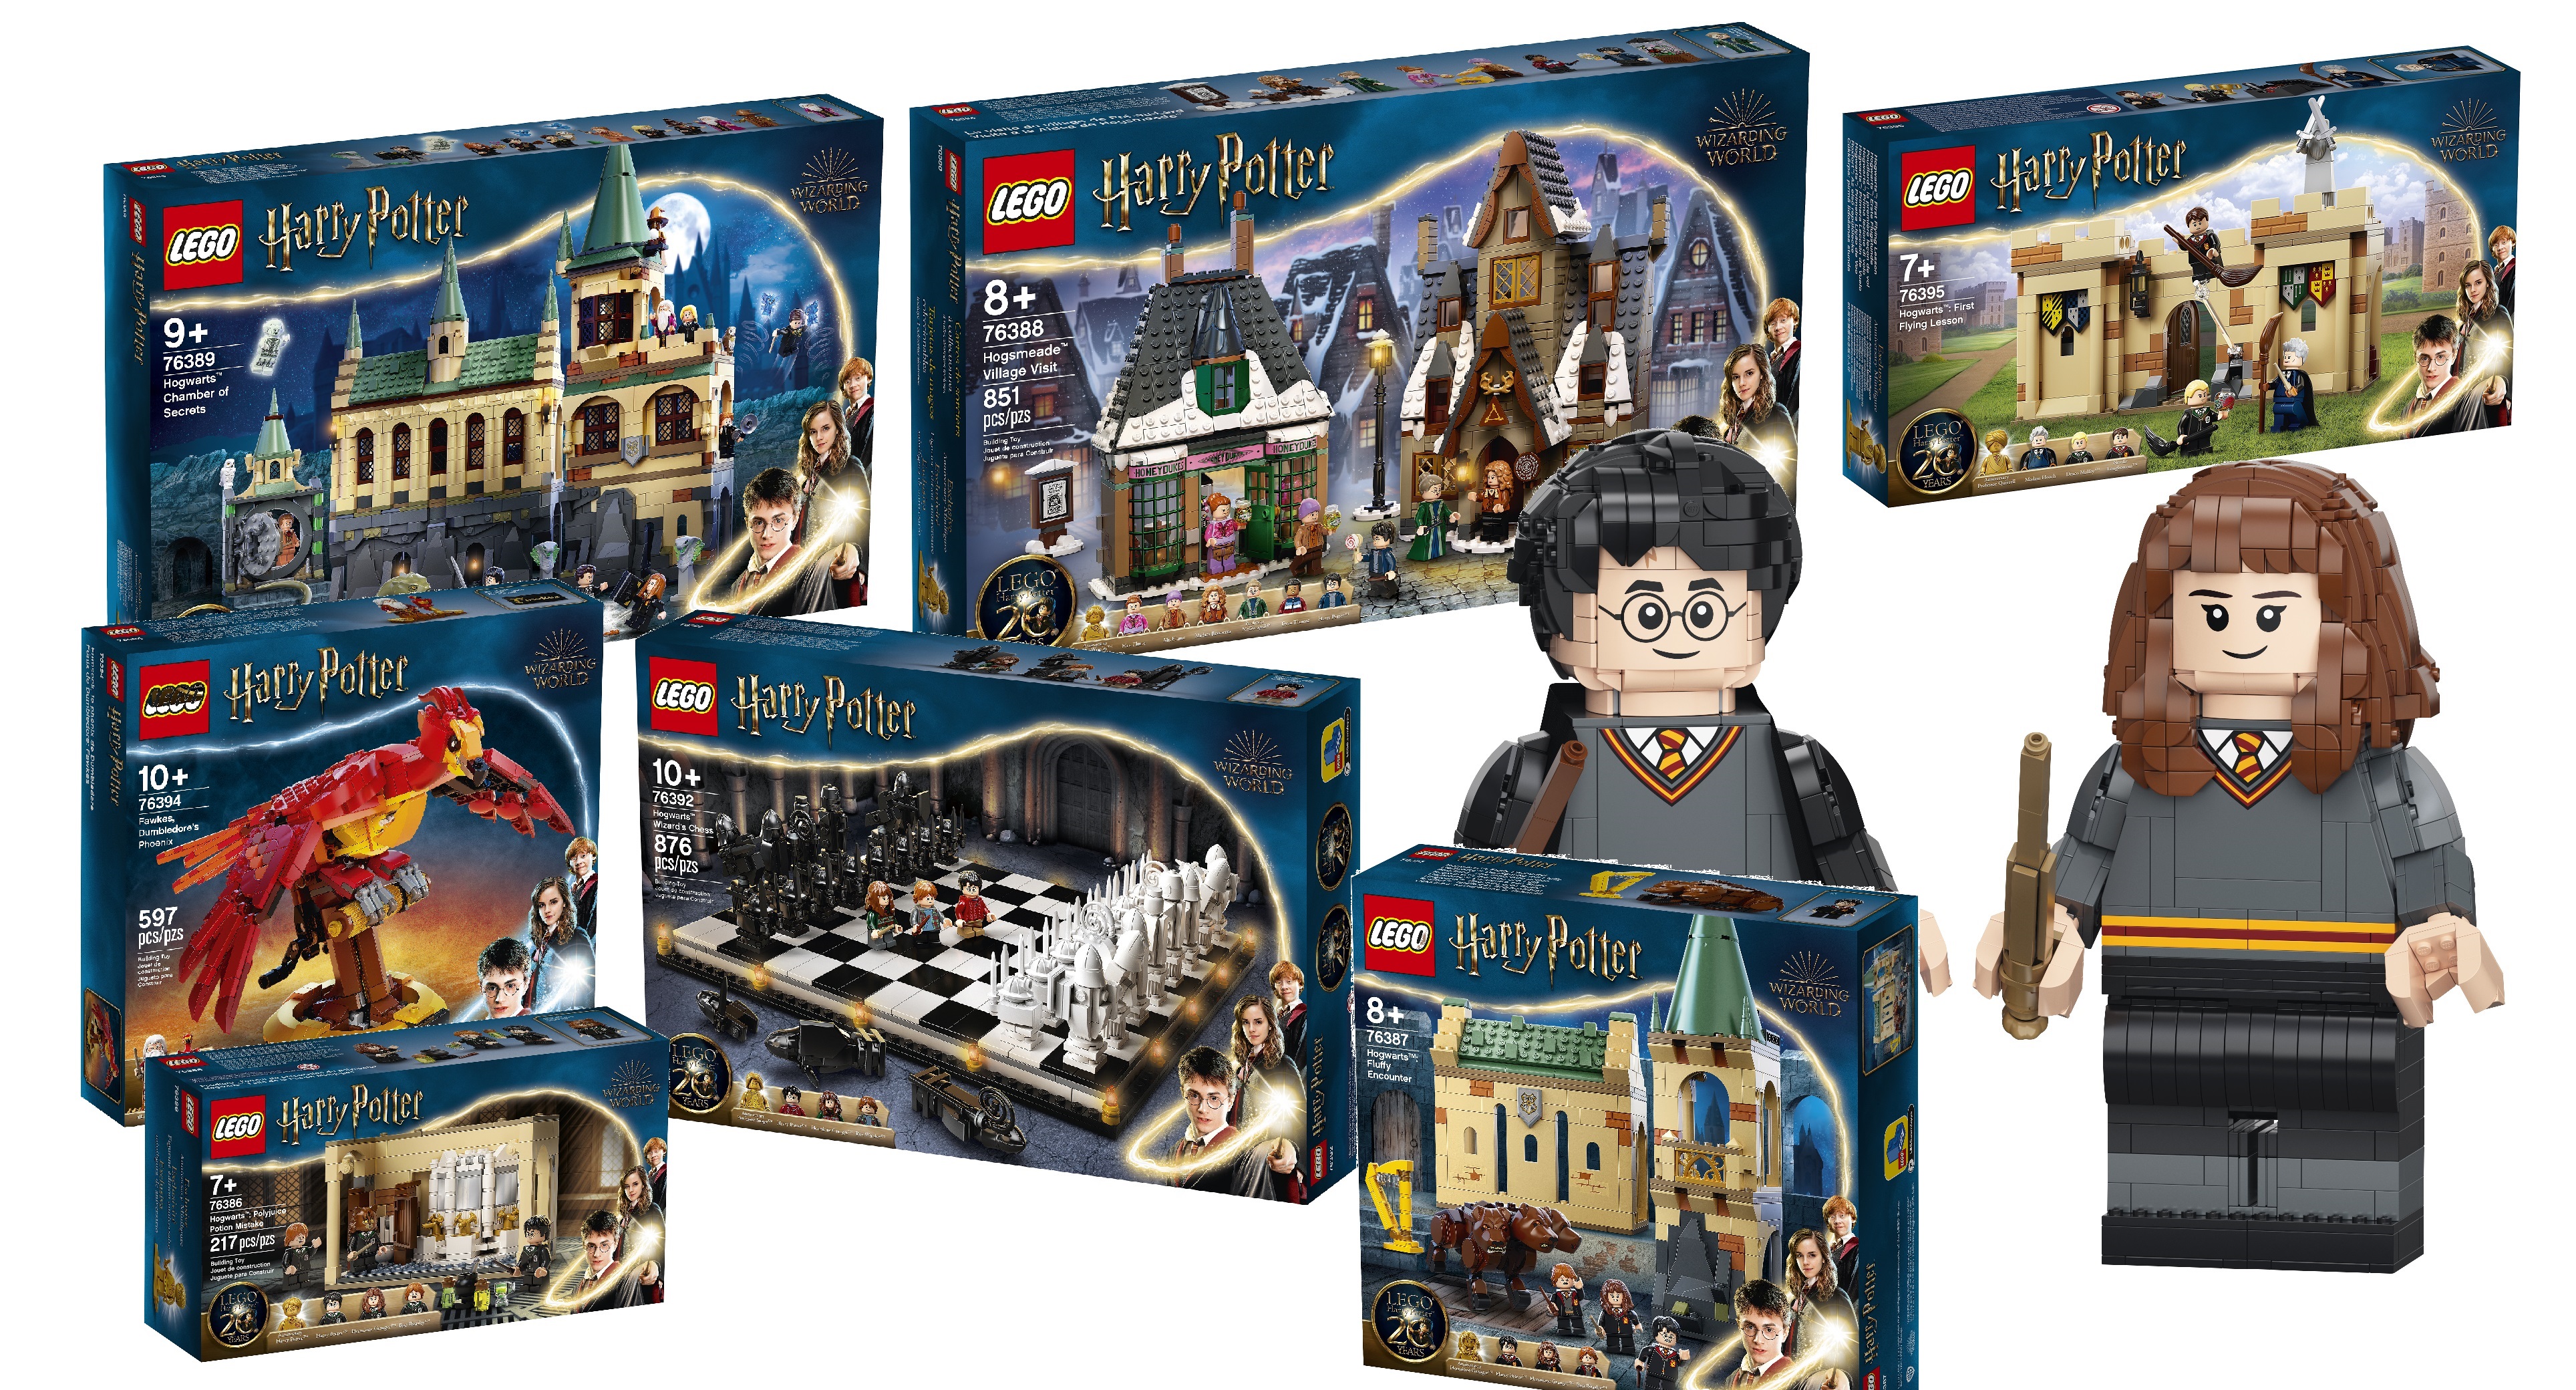 LEGO Minifigures Harry Potter Sorcerer's Stone/Chamber of Secrets CHOOSE YOURS